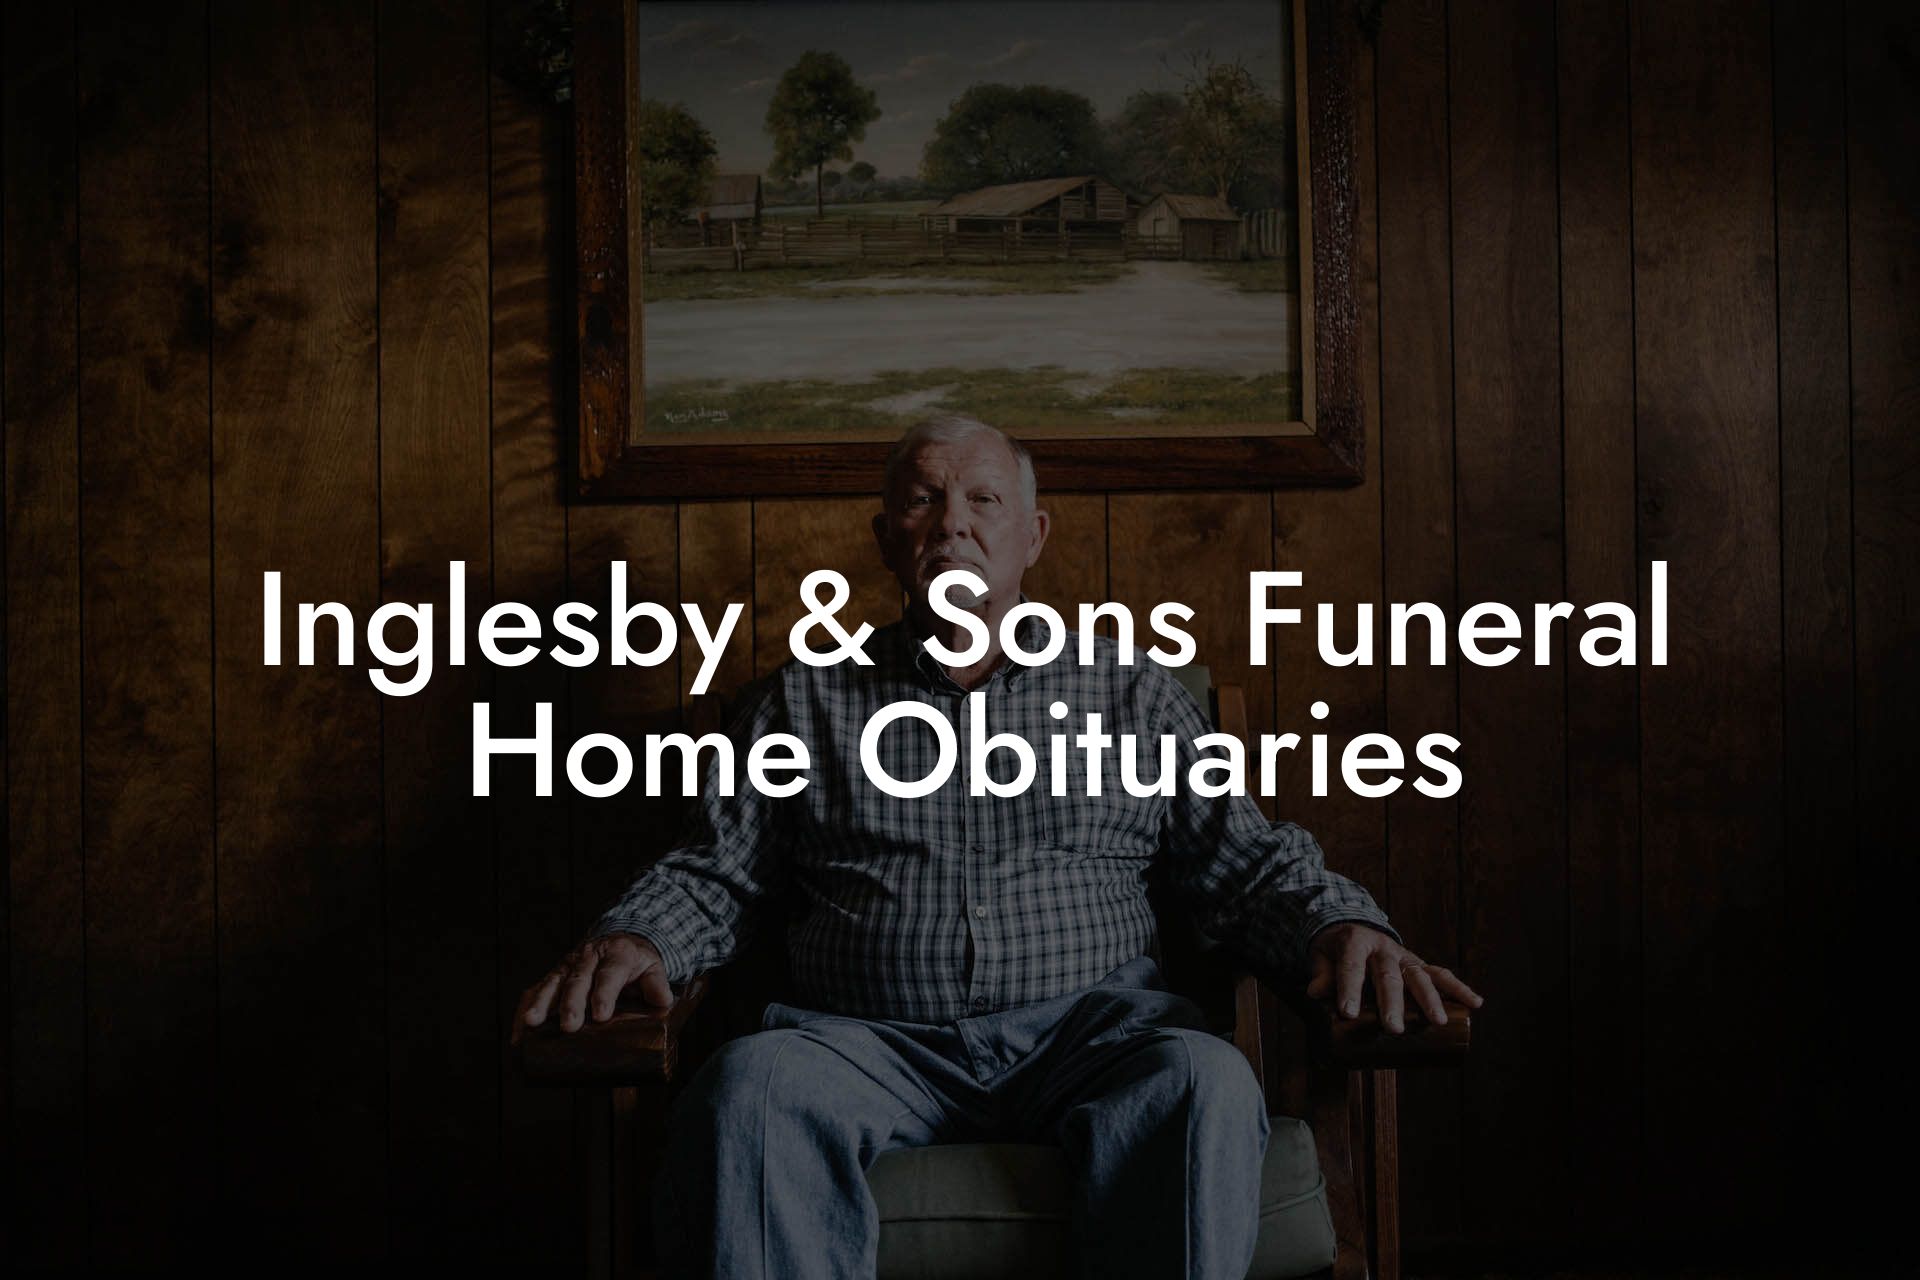 Inglesby & Sons Funeral Home Obituaries